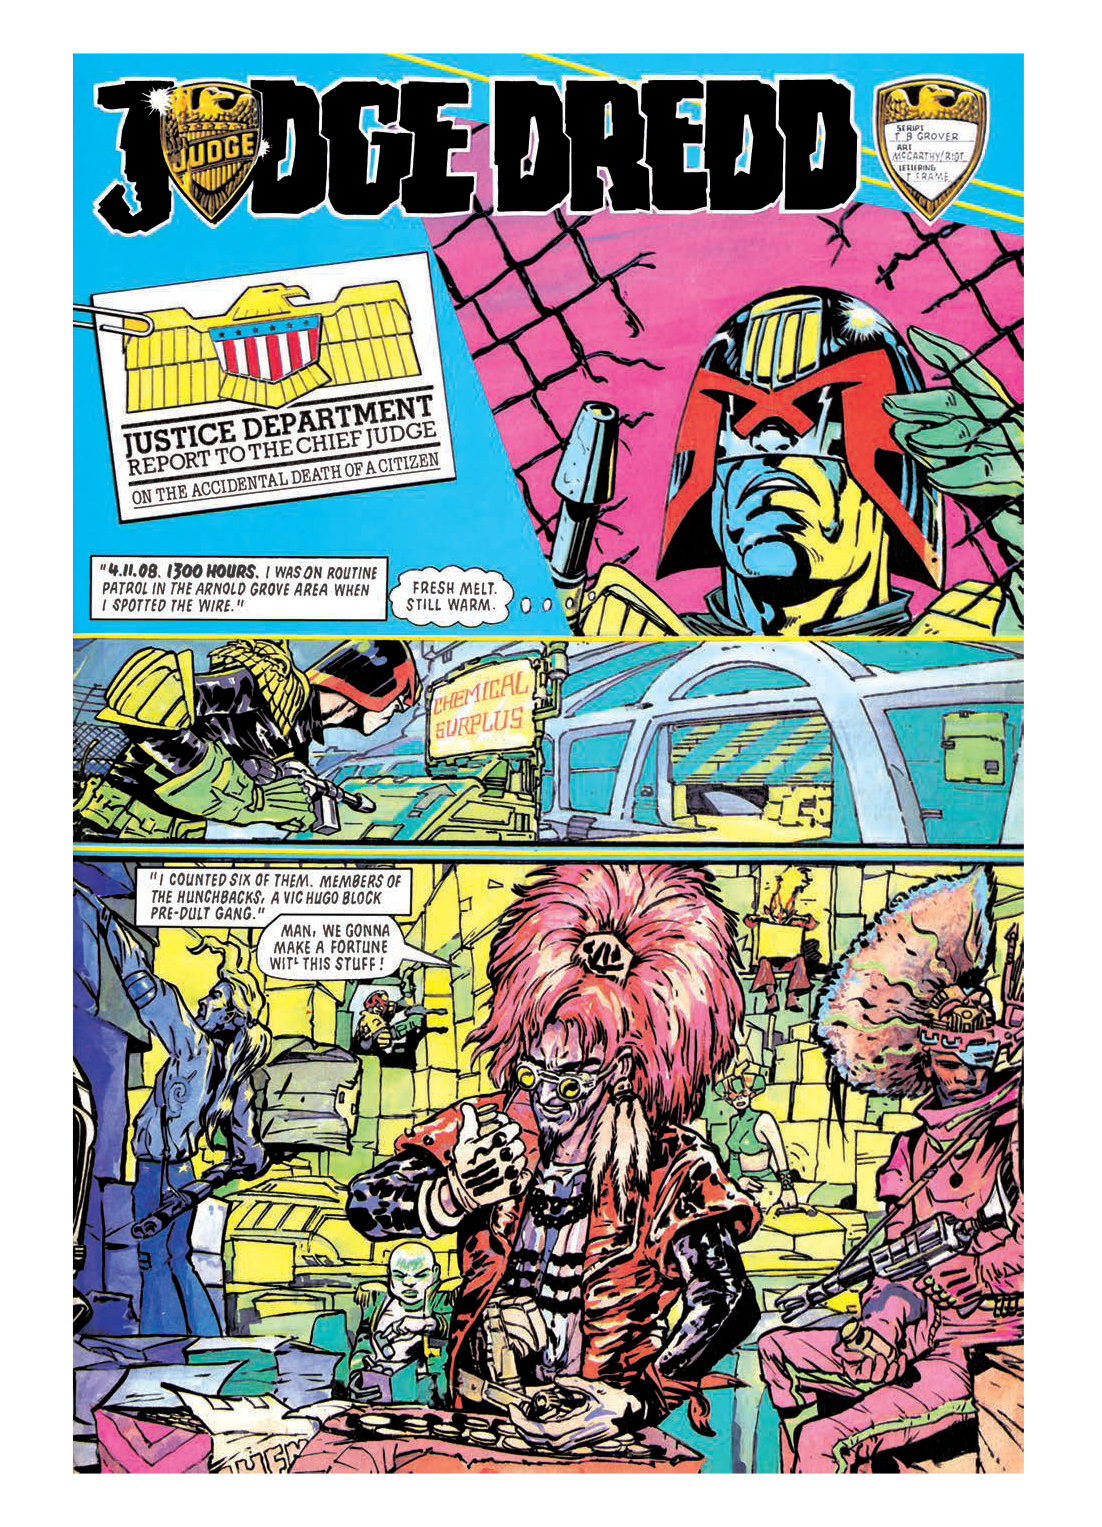 Read online Judge Dredd: The Restricted Files comic -  Issue # TPB 2 - 75